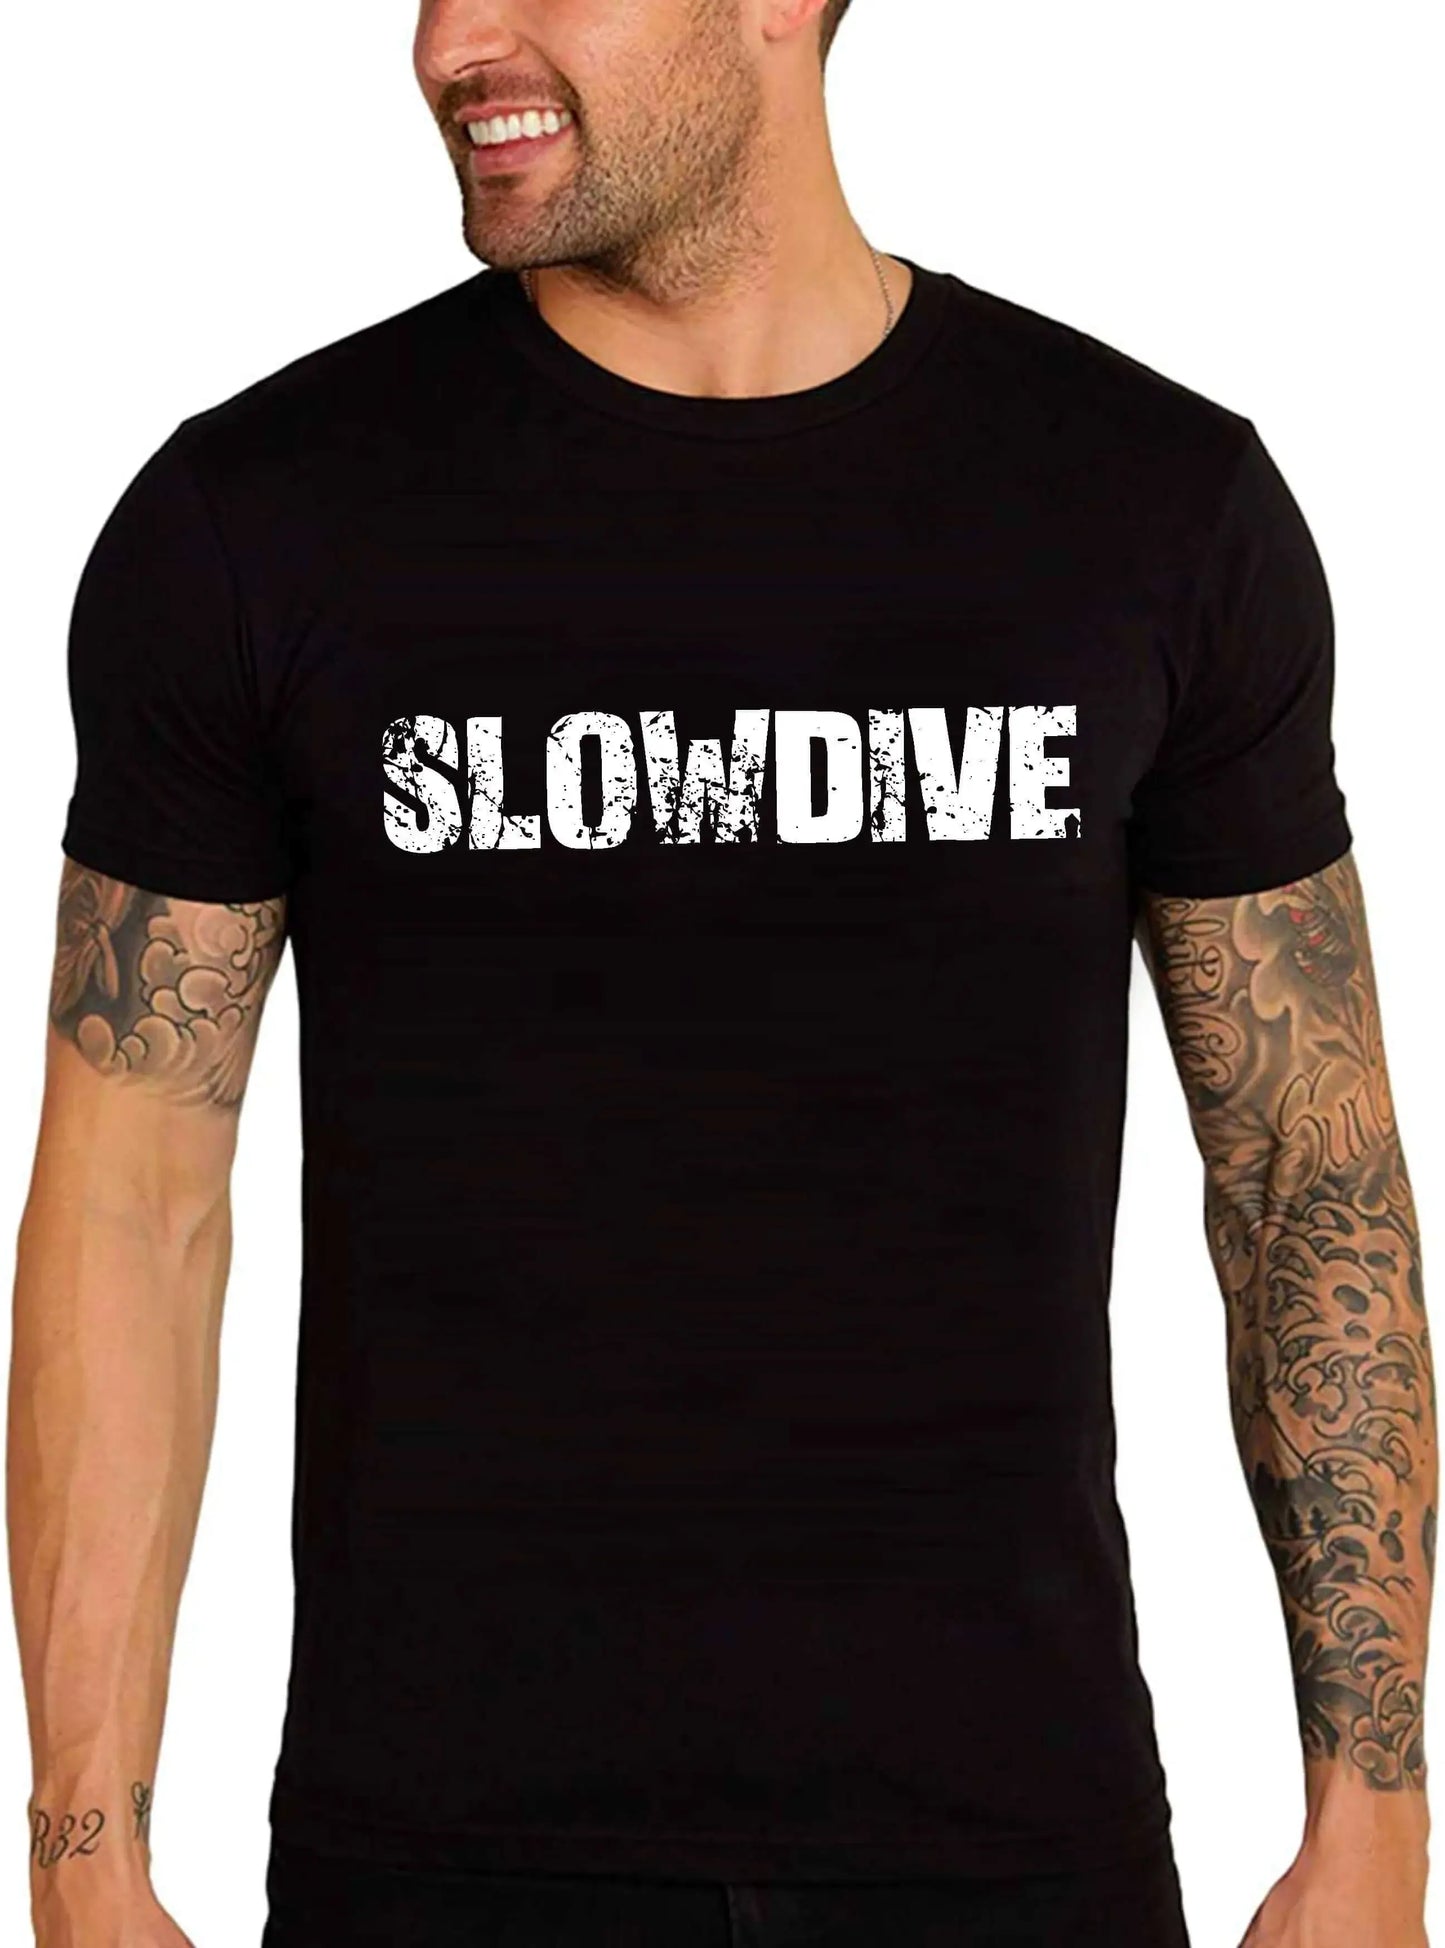 Men's Graphic T-Shirt Slowdive Eco-Friendly Limited Edition Short Sleeve Tee-Shirt Vintage Birthday Gift Novelty